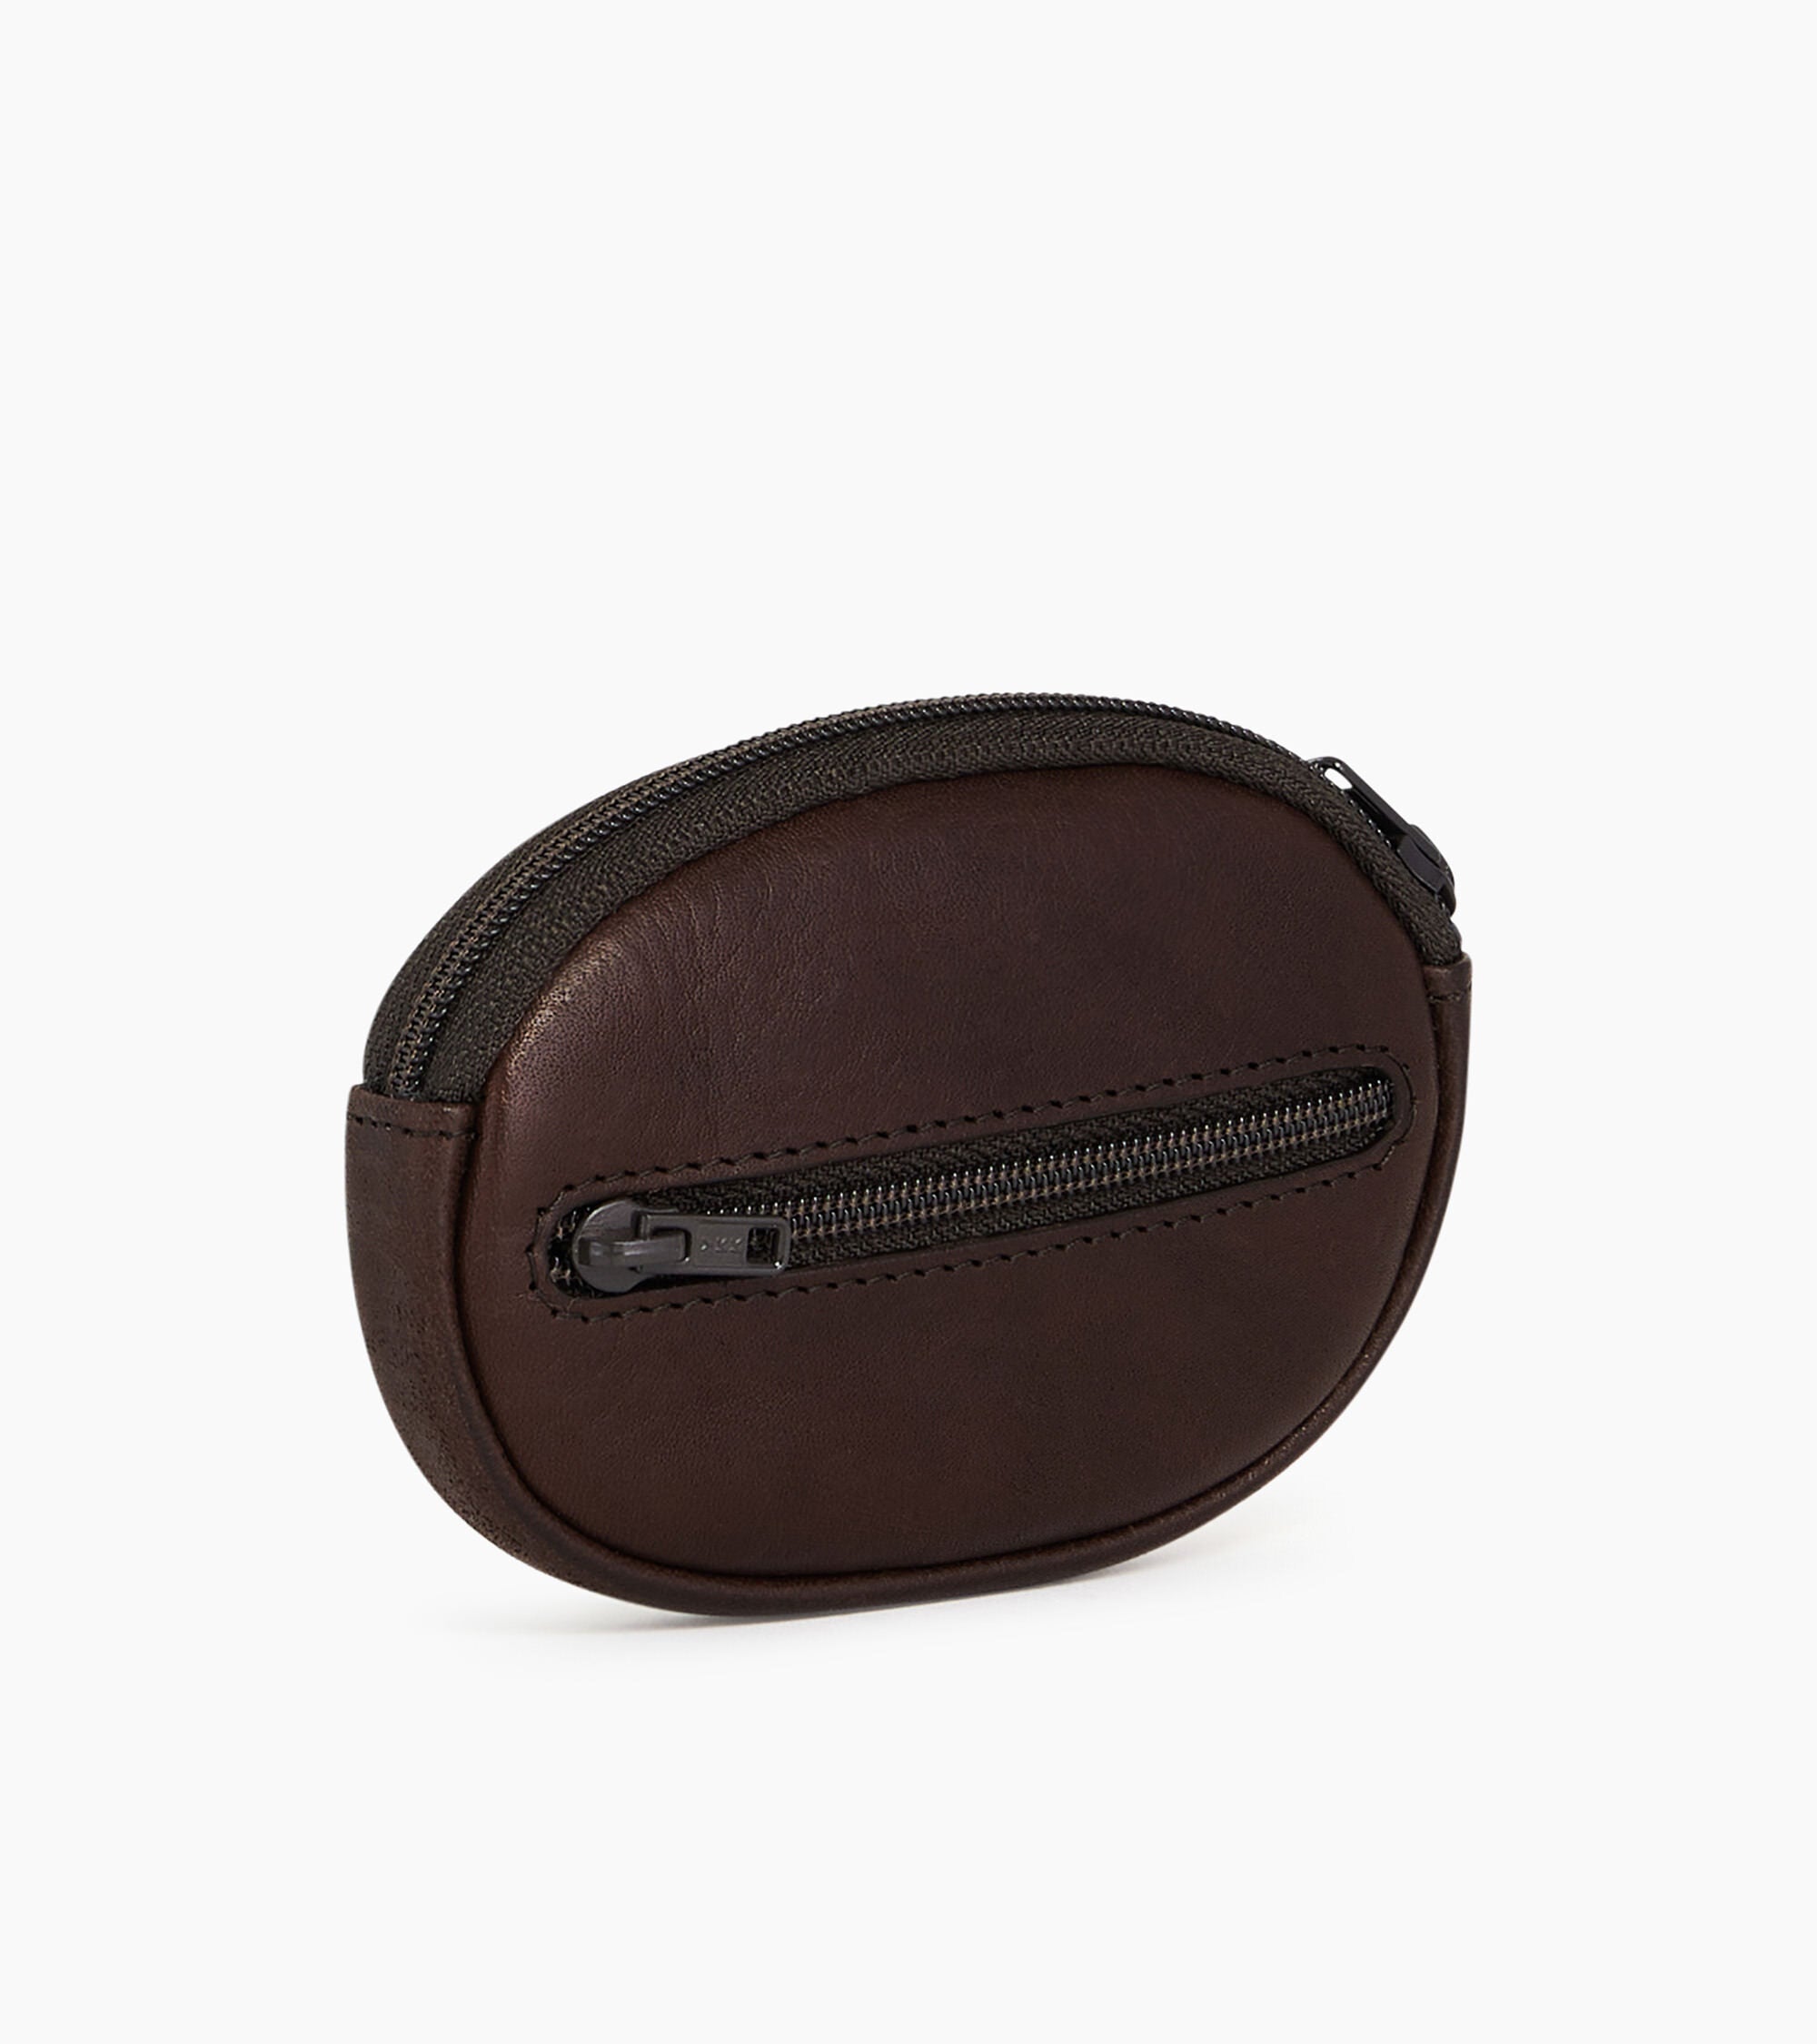 Zipped Gary oiled leather coin wallet